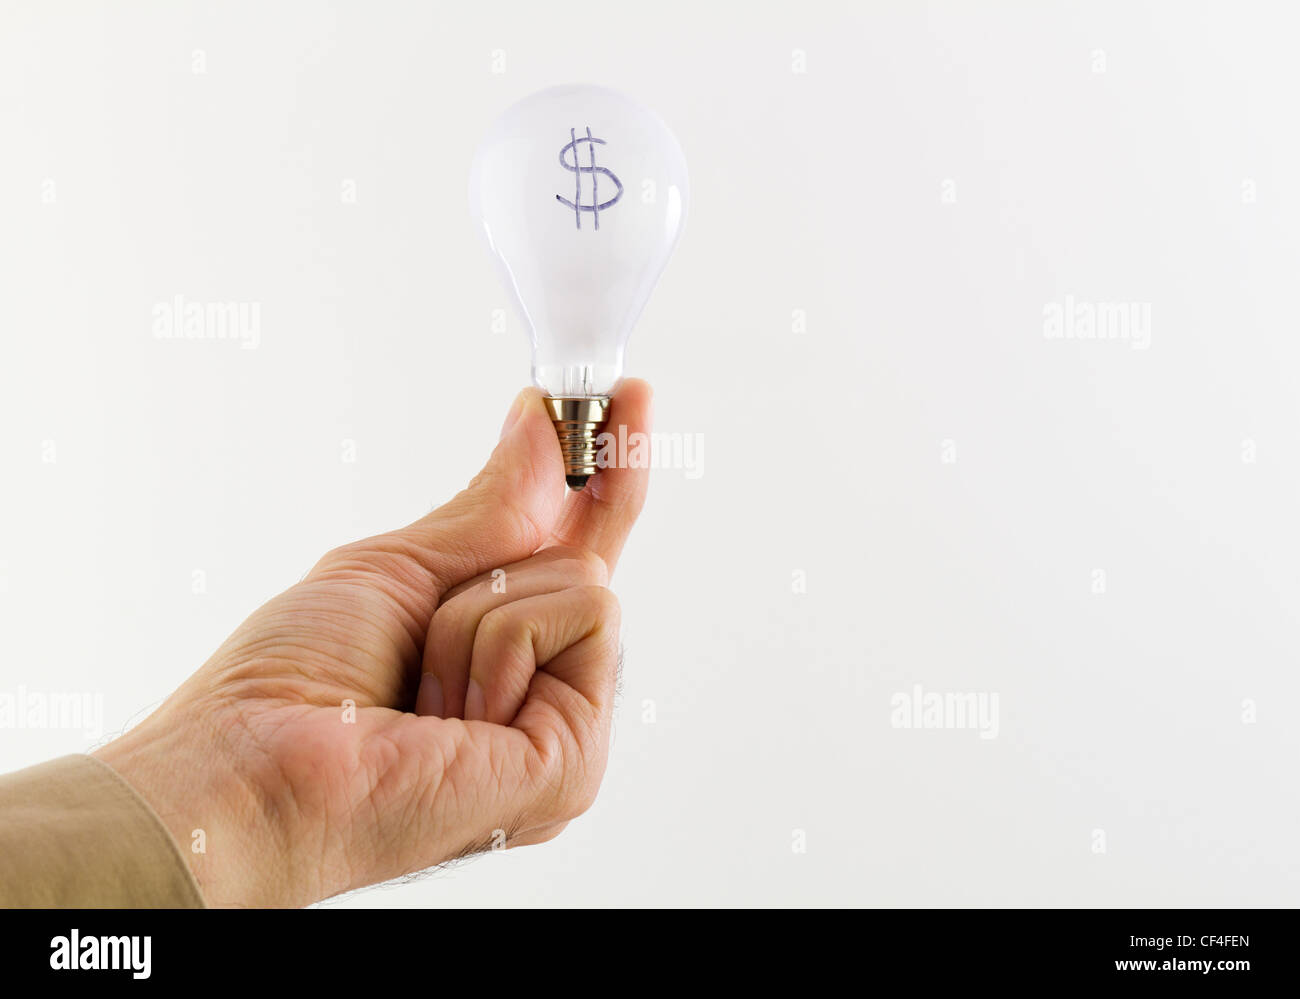 hand holding a lightbulb representing cost of energy Stock Photo